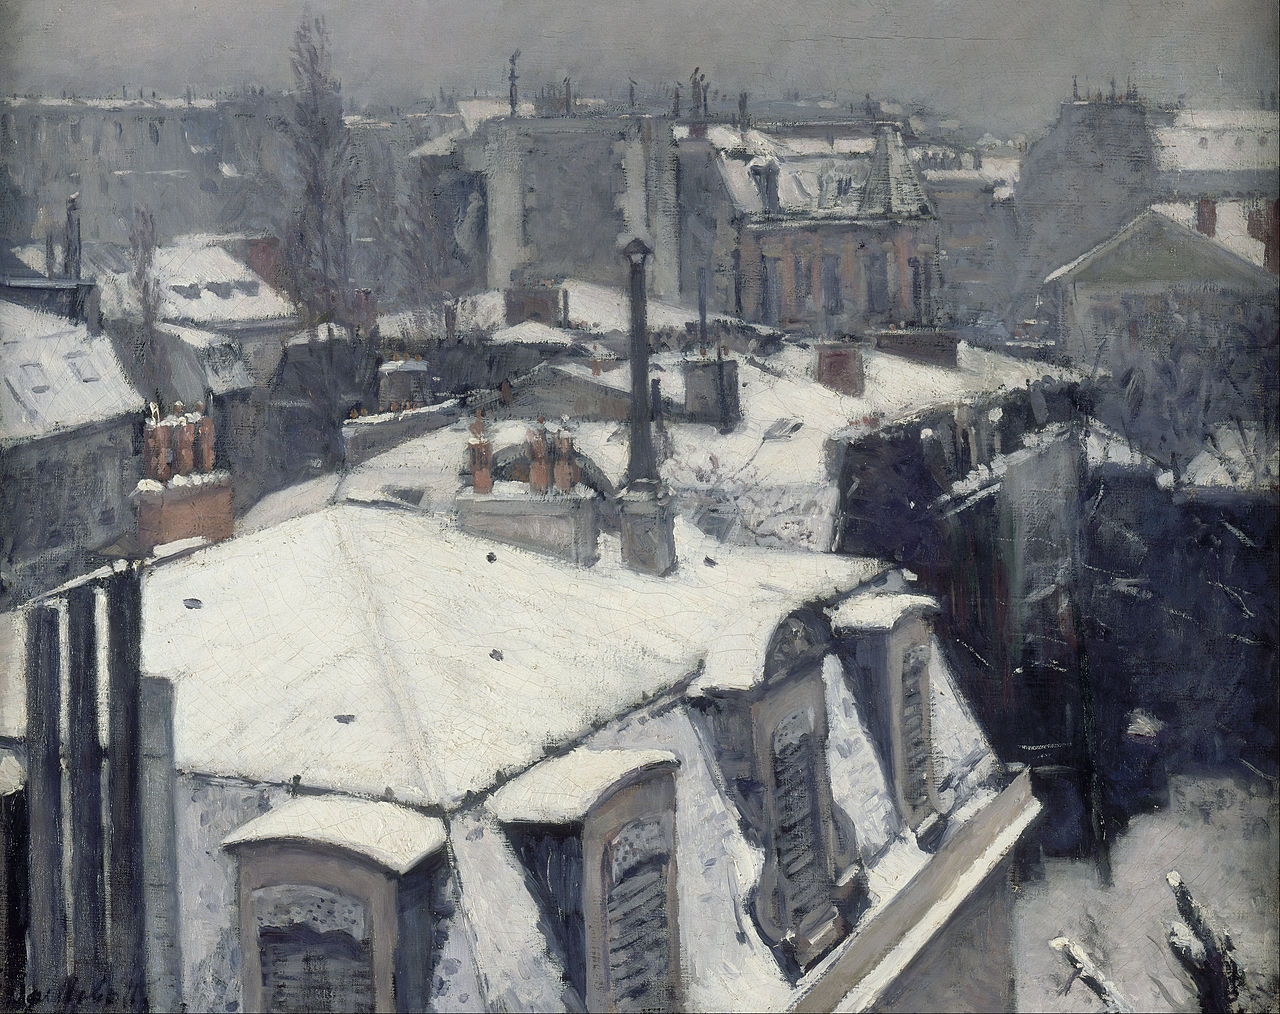 Rooftops in the Snow, by Gustave Caillebotte, 1878